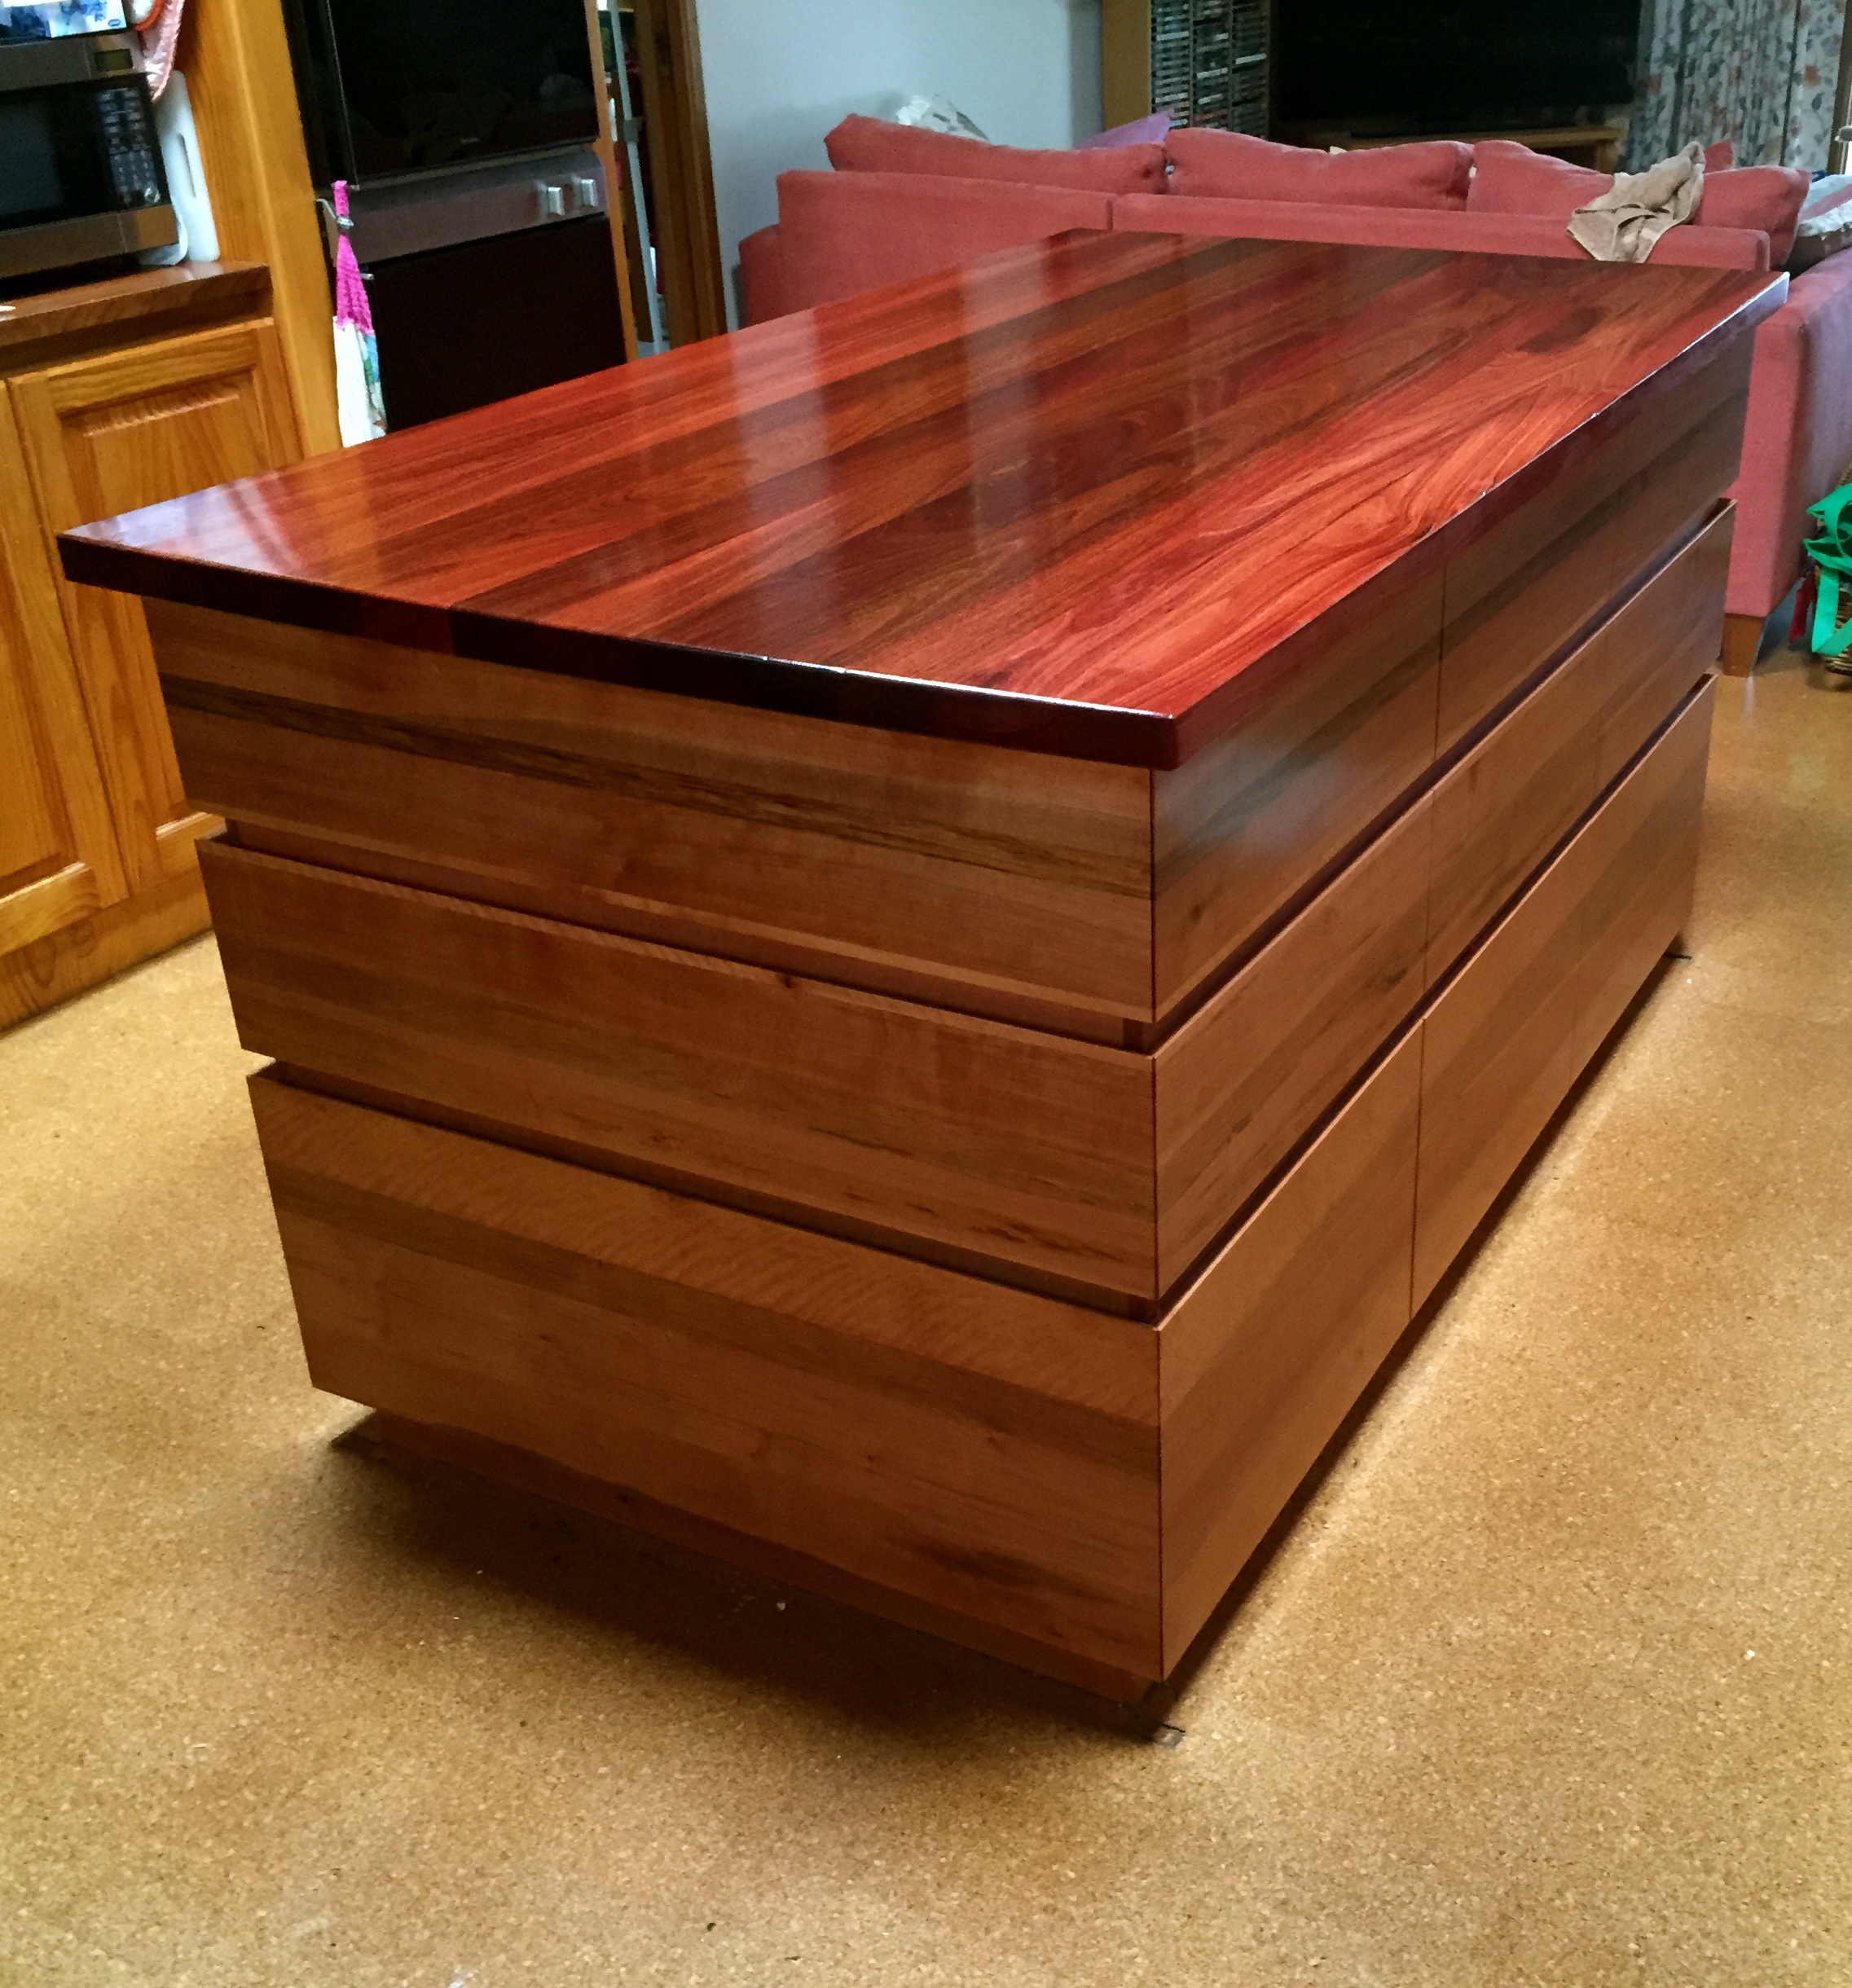 Double sided solid Jarrah island bench with nine drawers on both sides. 